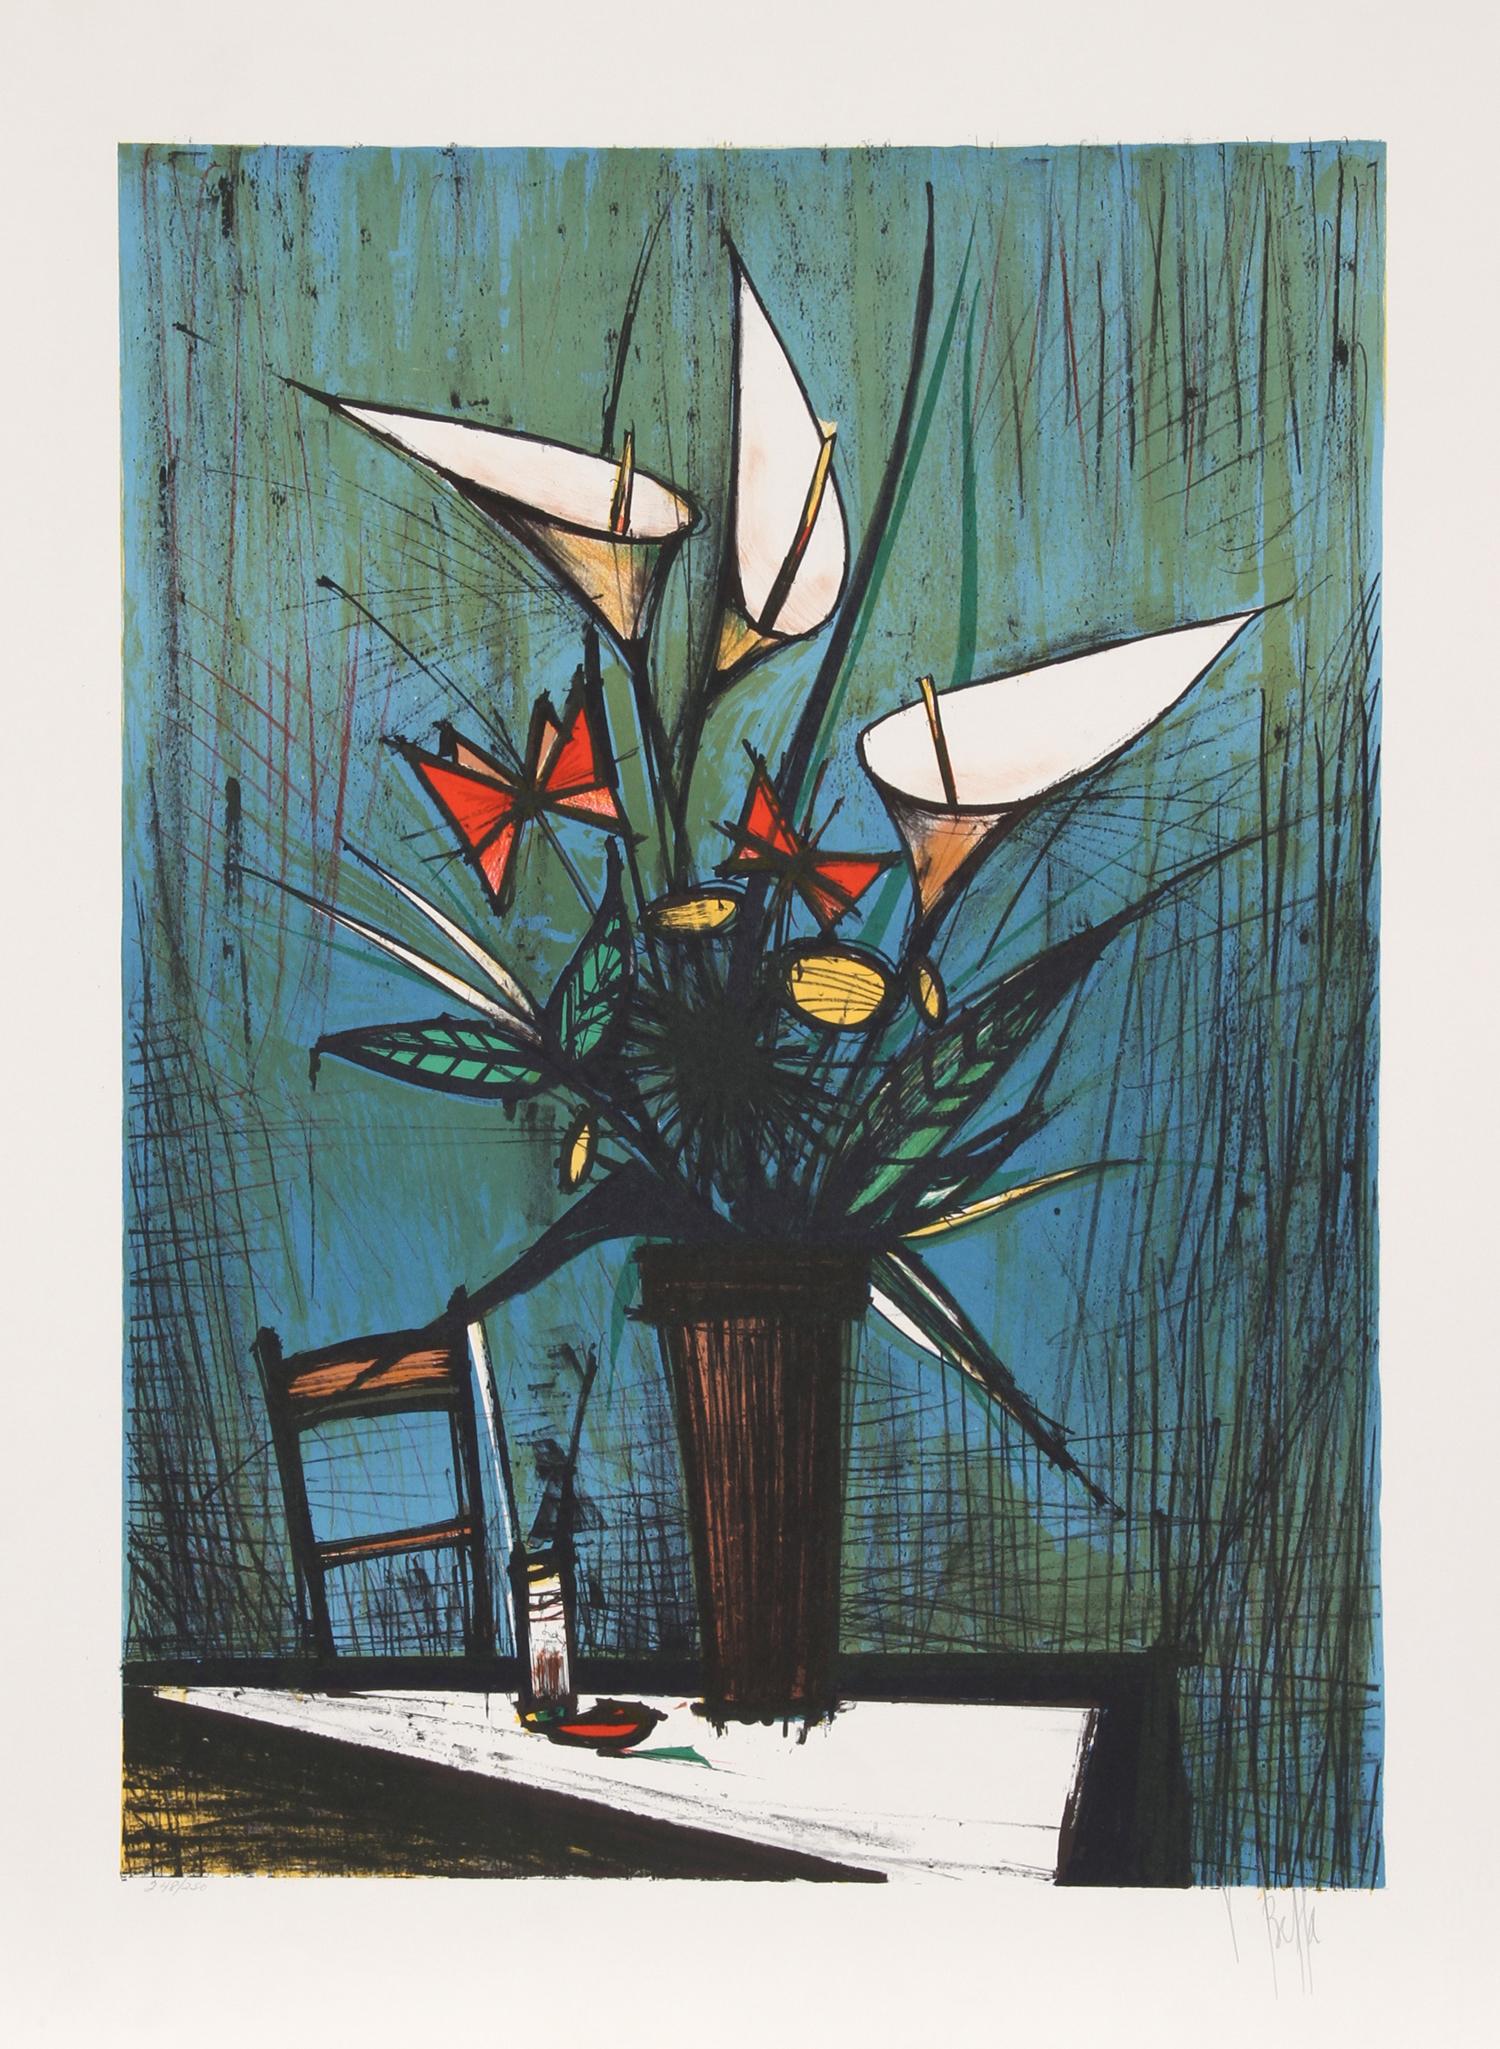 Flowers
V. Beffa
Date: circa 1977
Lithograph on Arches, Signed and numbered in pencil
Edition of 250
Image Size: 24 x 17.5 inches
Size: 29.5 in. x 21.5 in. (74.93 cm x 54.61 cm)